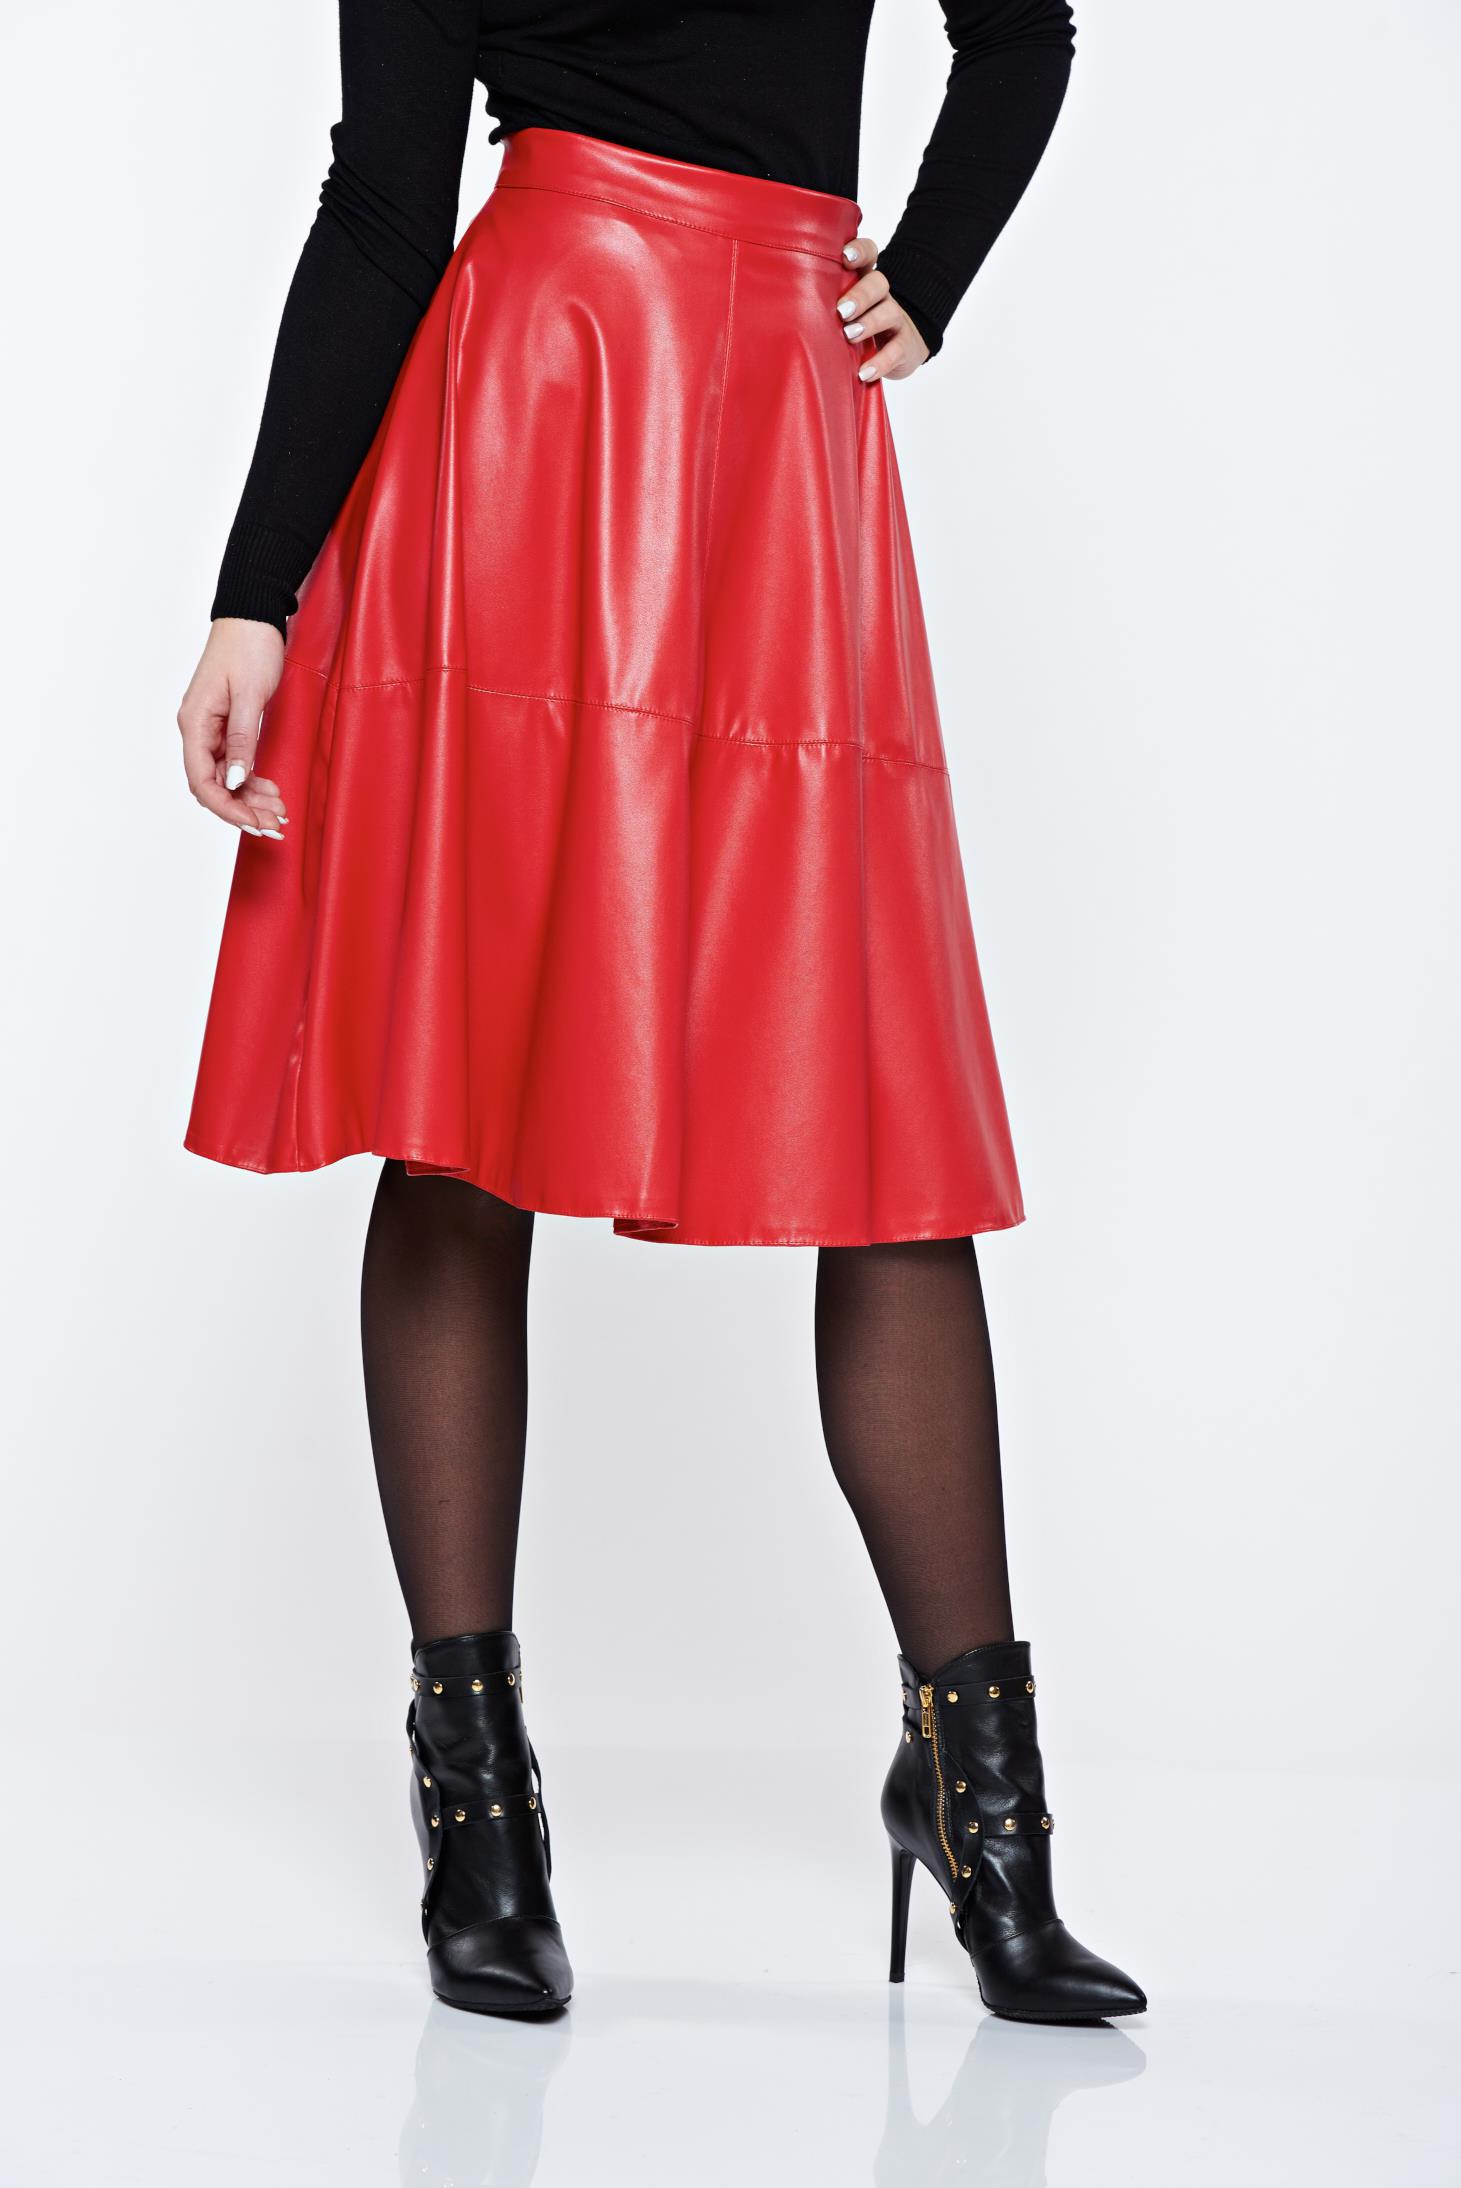 StarShinerS red casual cloche high waisted skirt from ecological leather